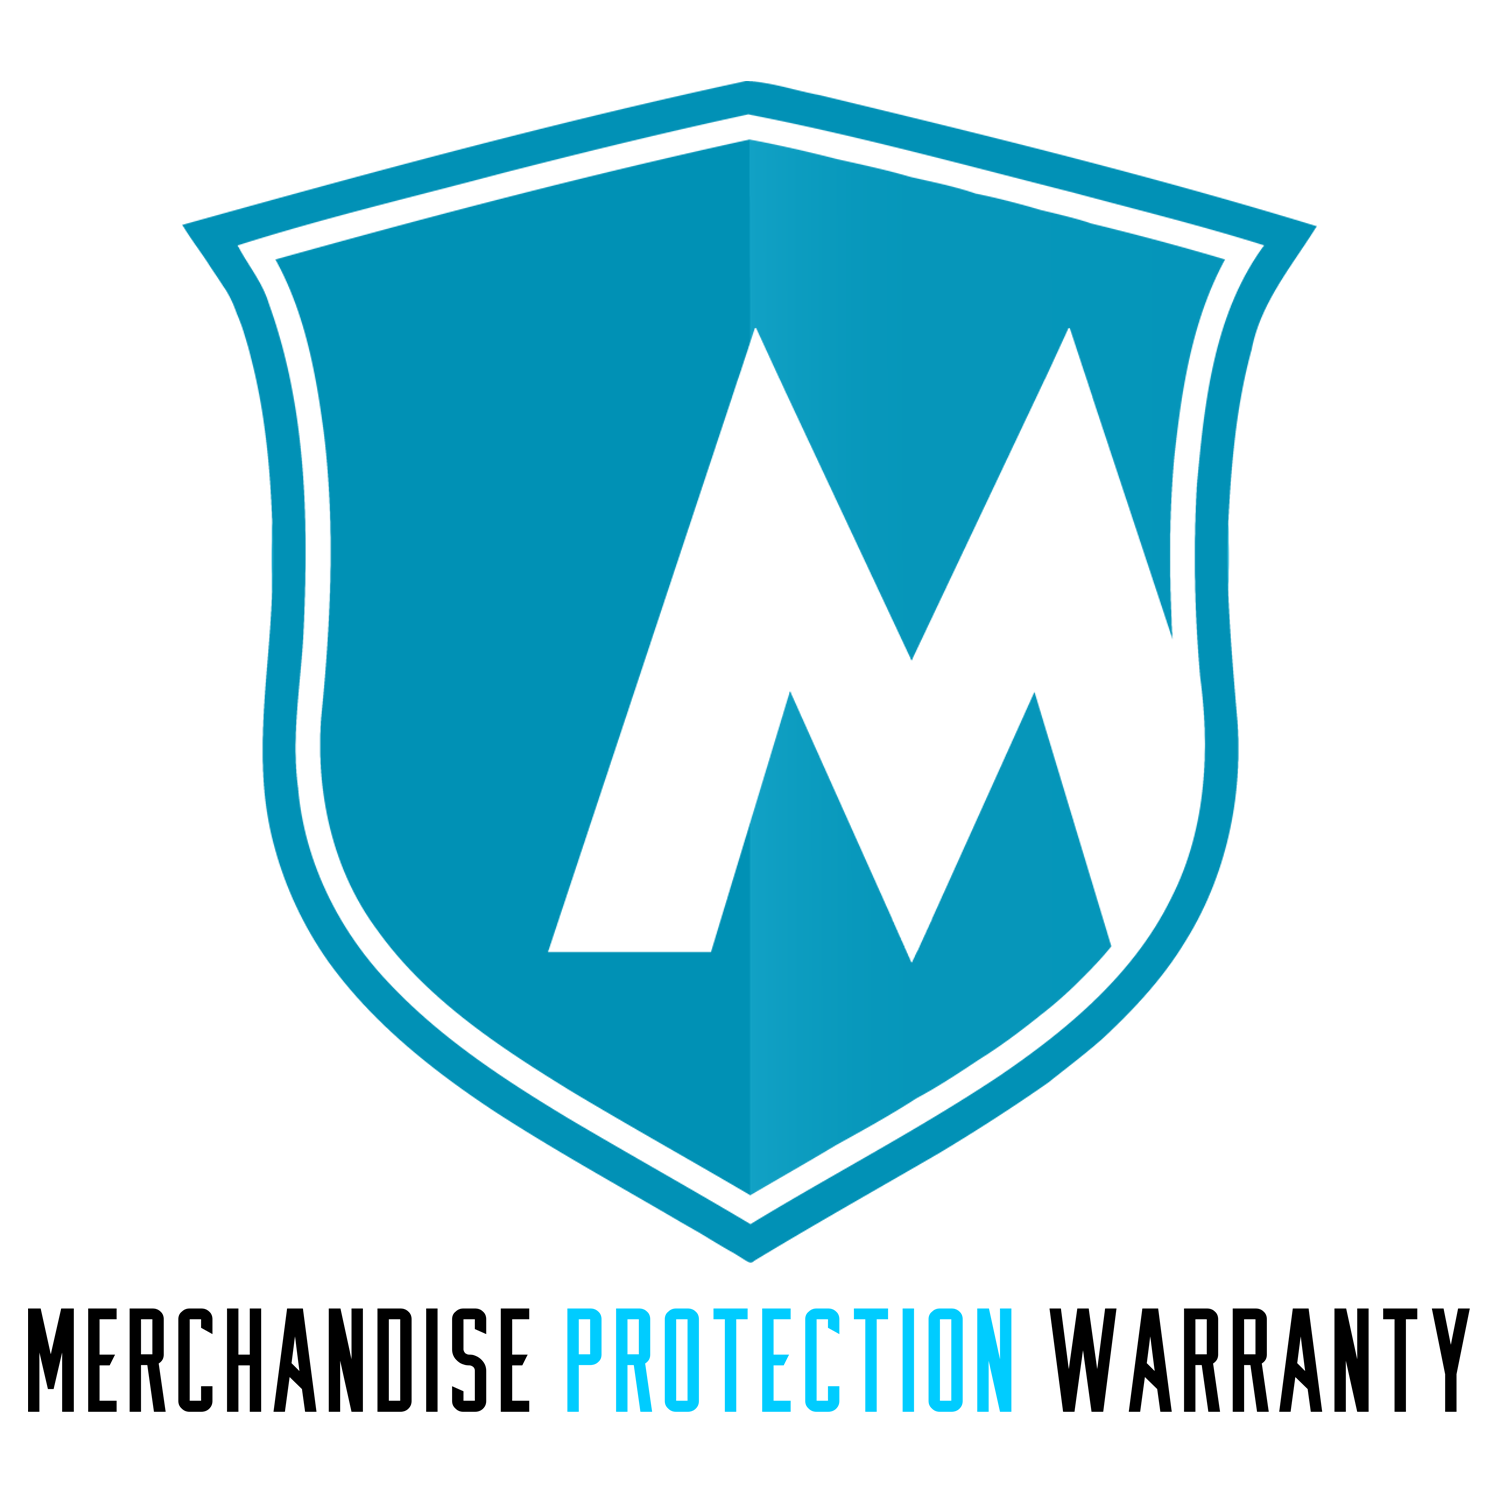 2 Year Merchandise Protection Warranty under $1500 (Accidental, Prepaid Shipping)